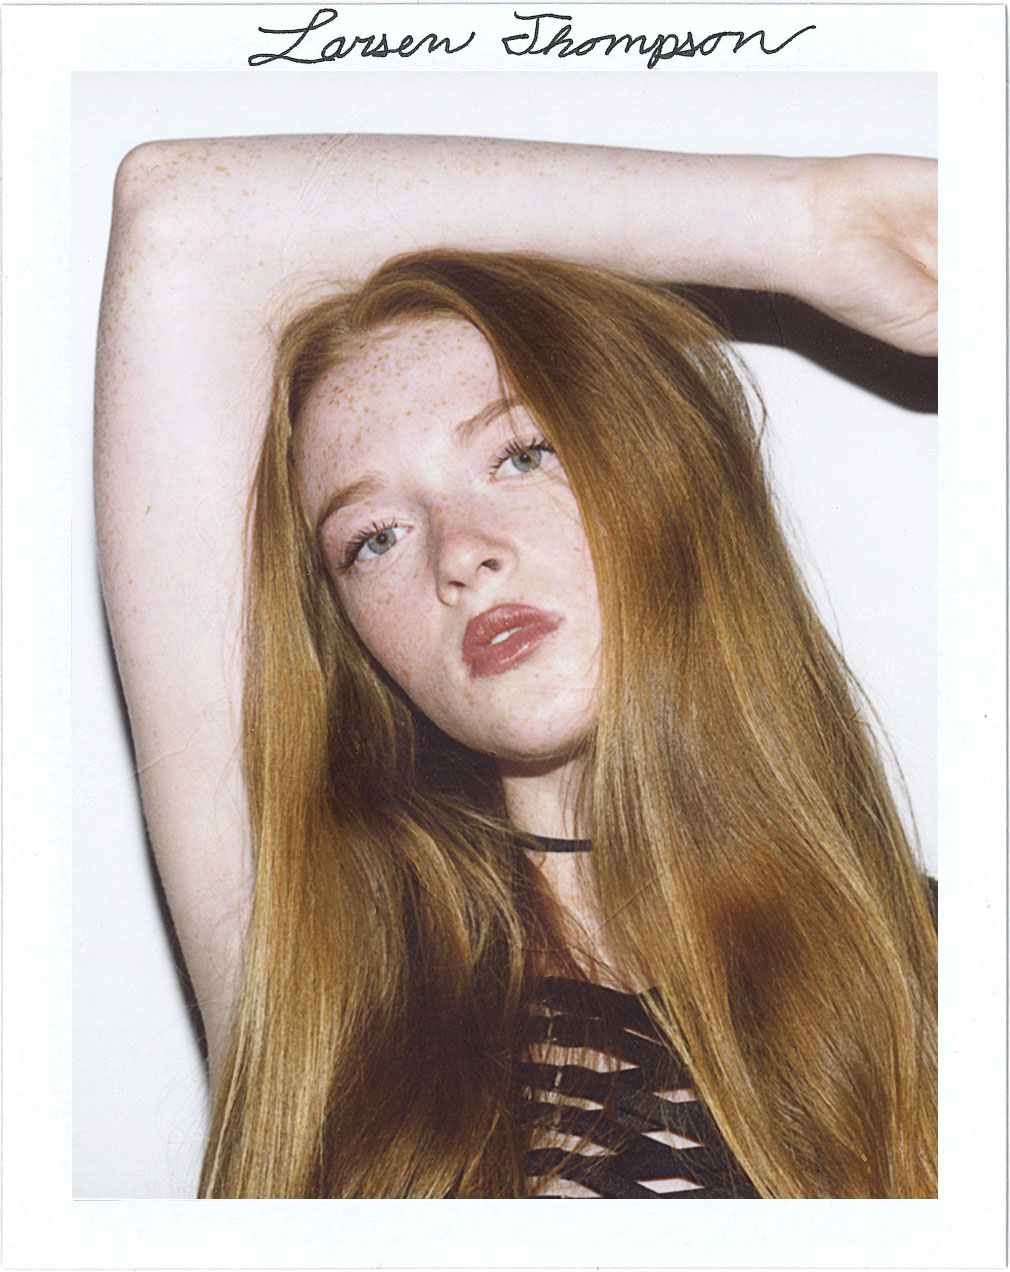 Polaroid Portrait of Model/Dancer Larsen Thompson for Nice People Only by Jane Smith Creative Agency